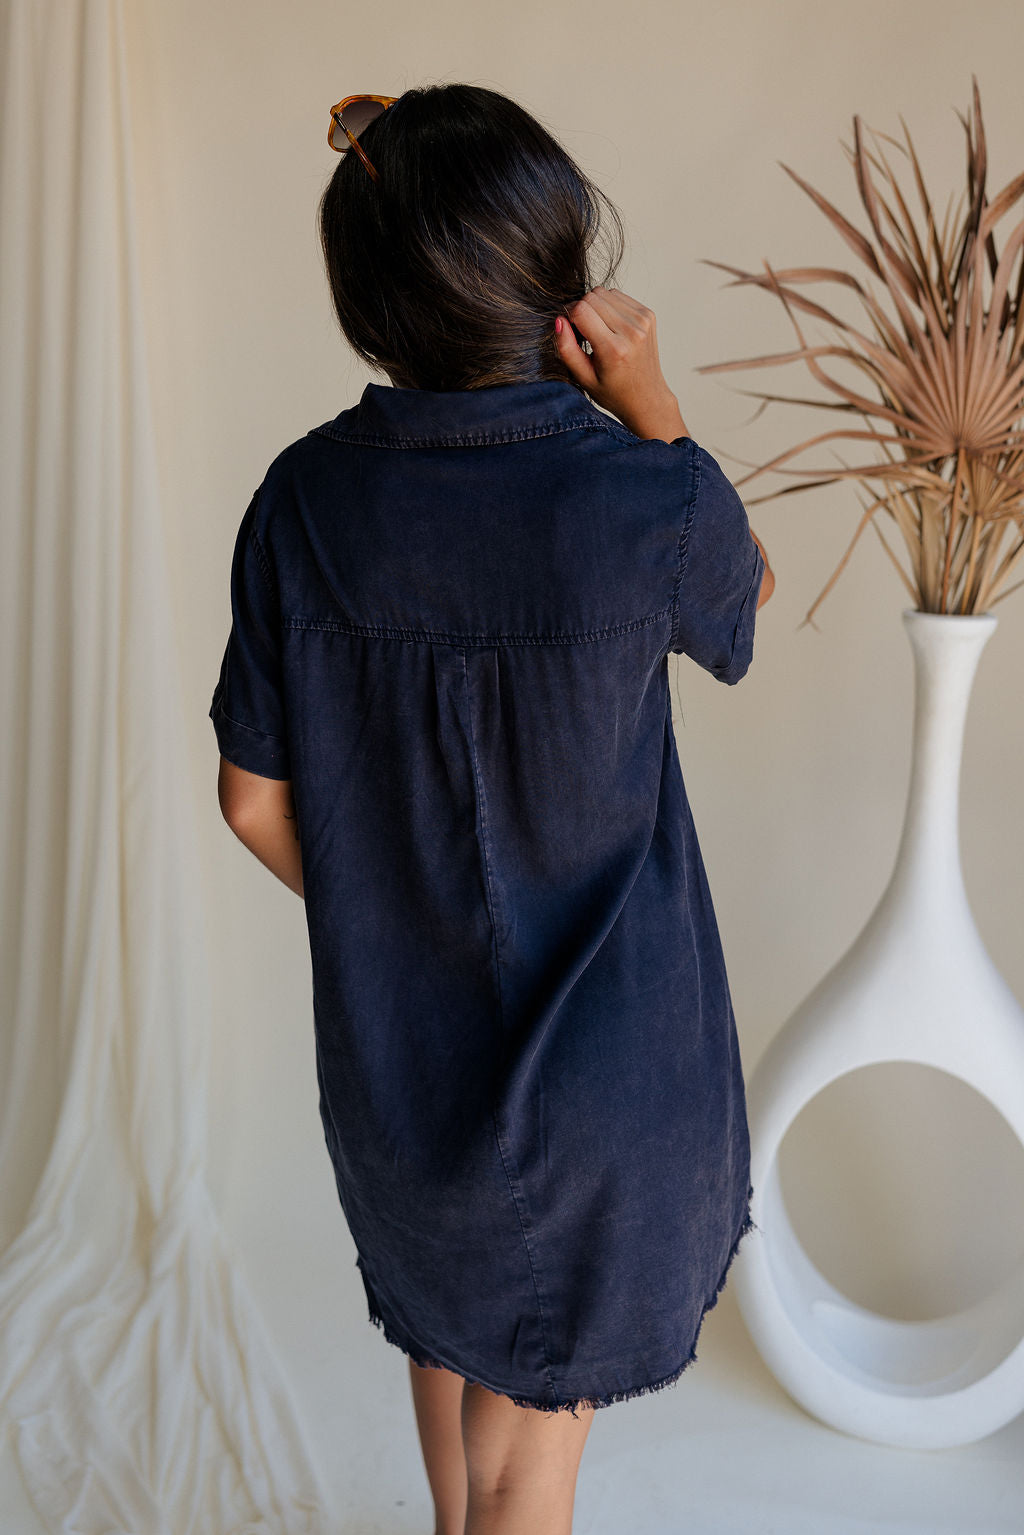 back view of female model wearing the Leighton Navy Fray Short Sleeve Mini Dress which featuresNavy Blue Tencel Fabric, Fray Hem Details, Mini Length, Quarter Button-Up Closure, Collared Neckline, Short Sleeves and Left Front Chest Pocket